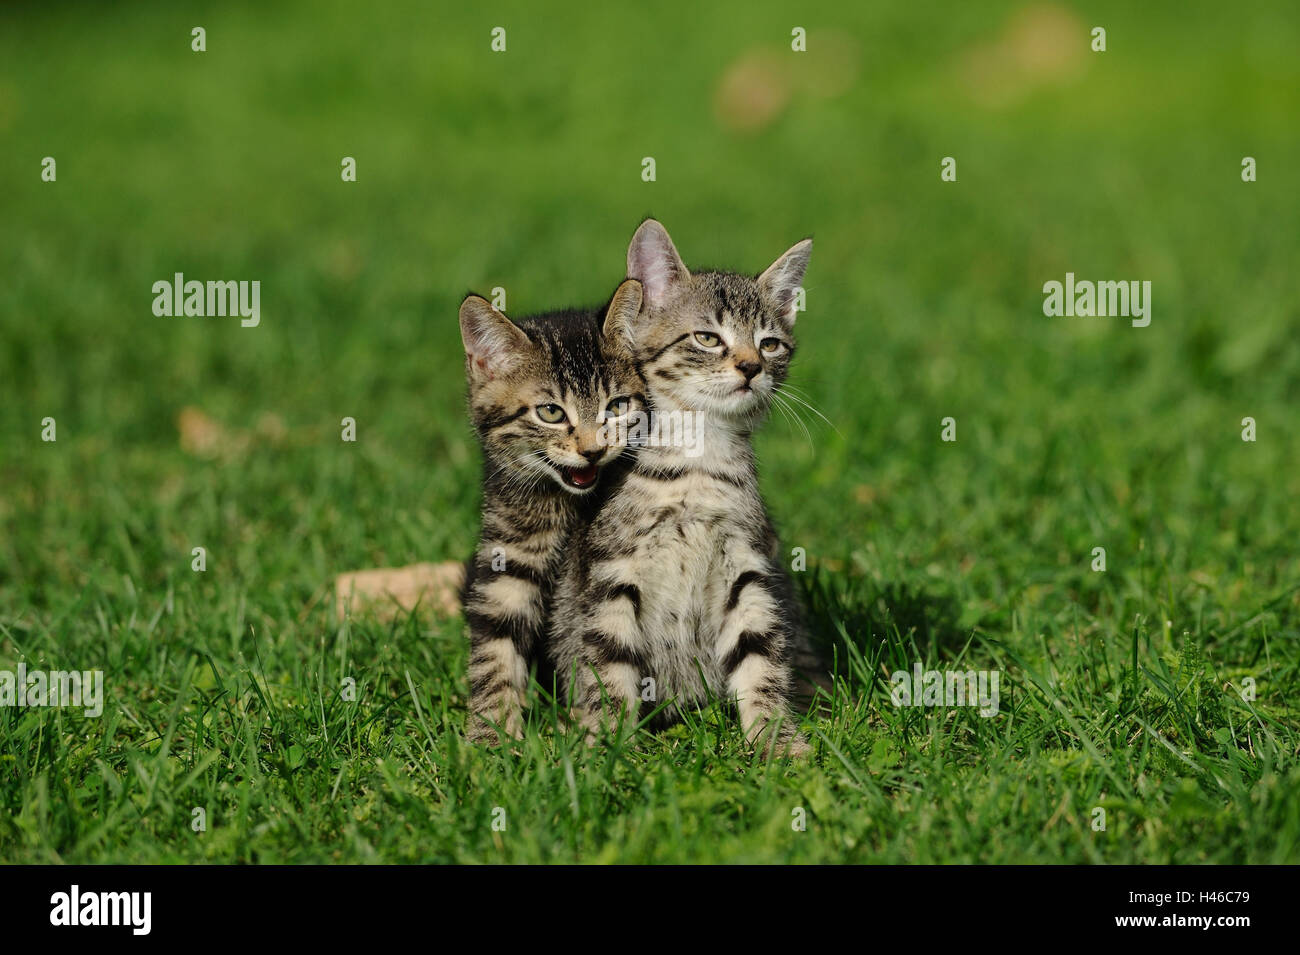 Domestic cats, young animals, meadow, sitting, Stock Photo